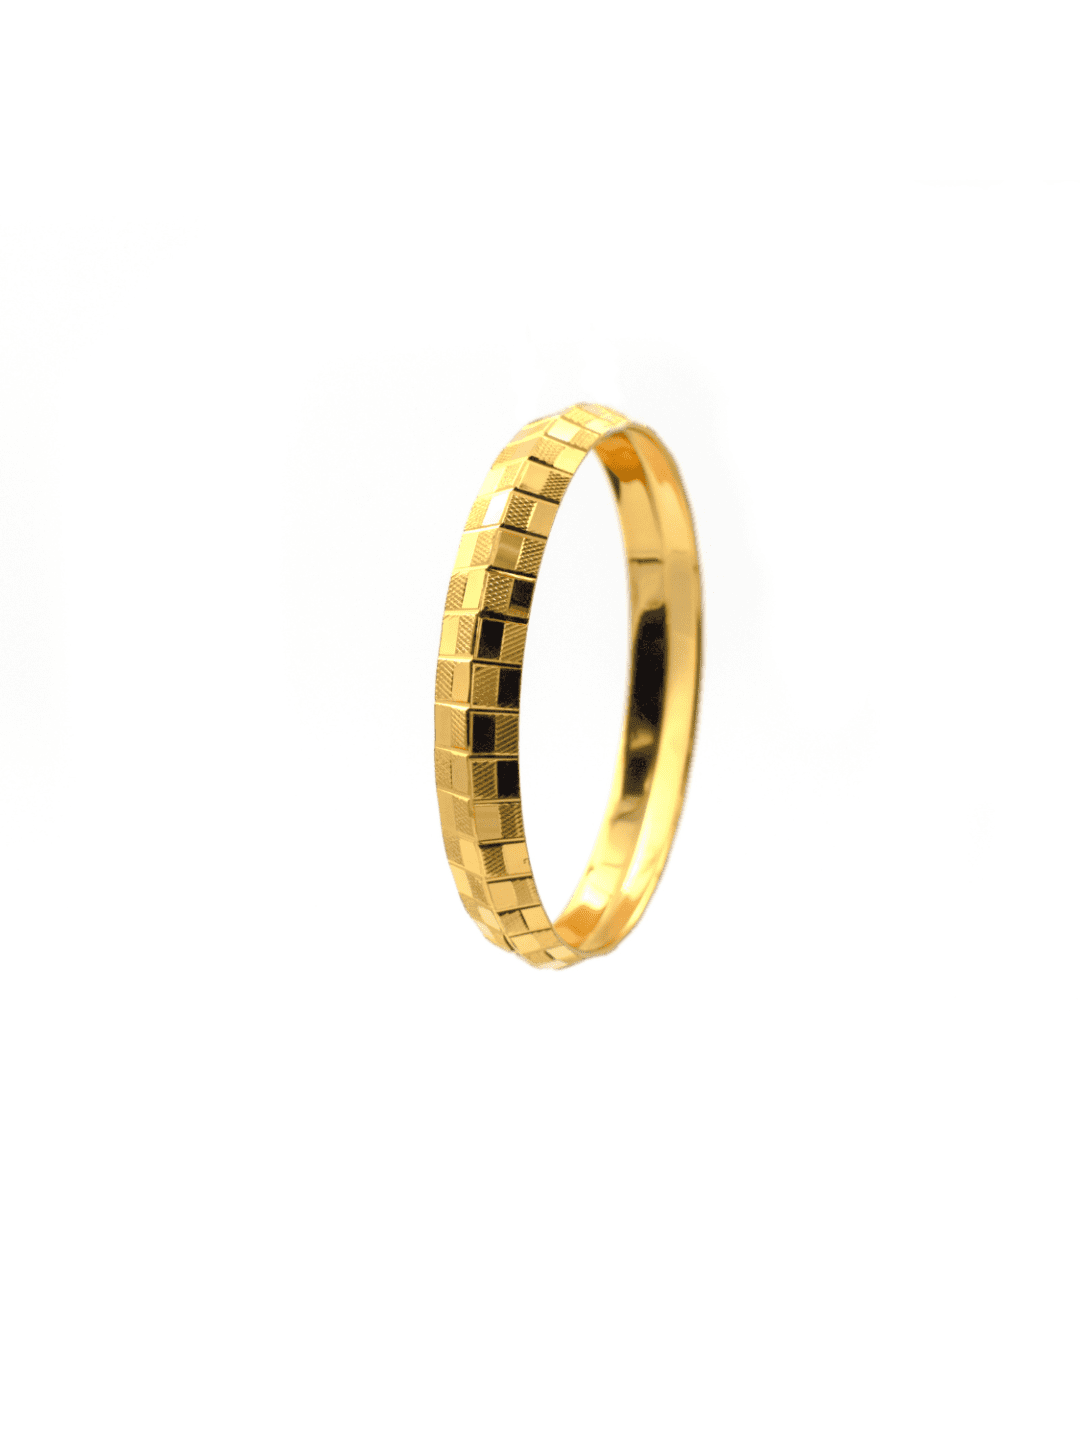 Gold Plated Block Look Alike Non- Openable Bracelet